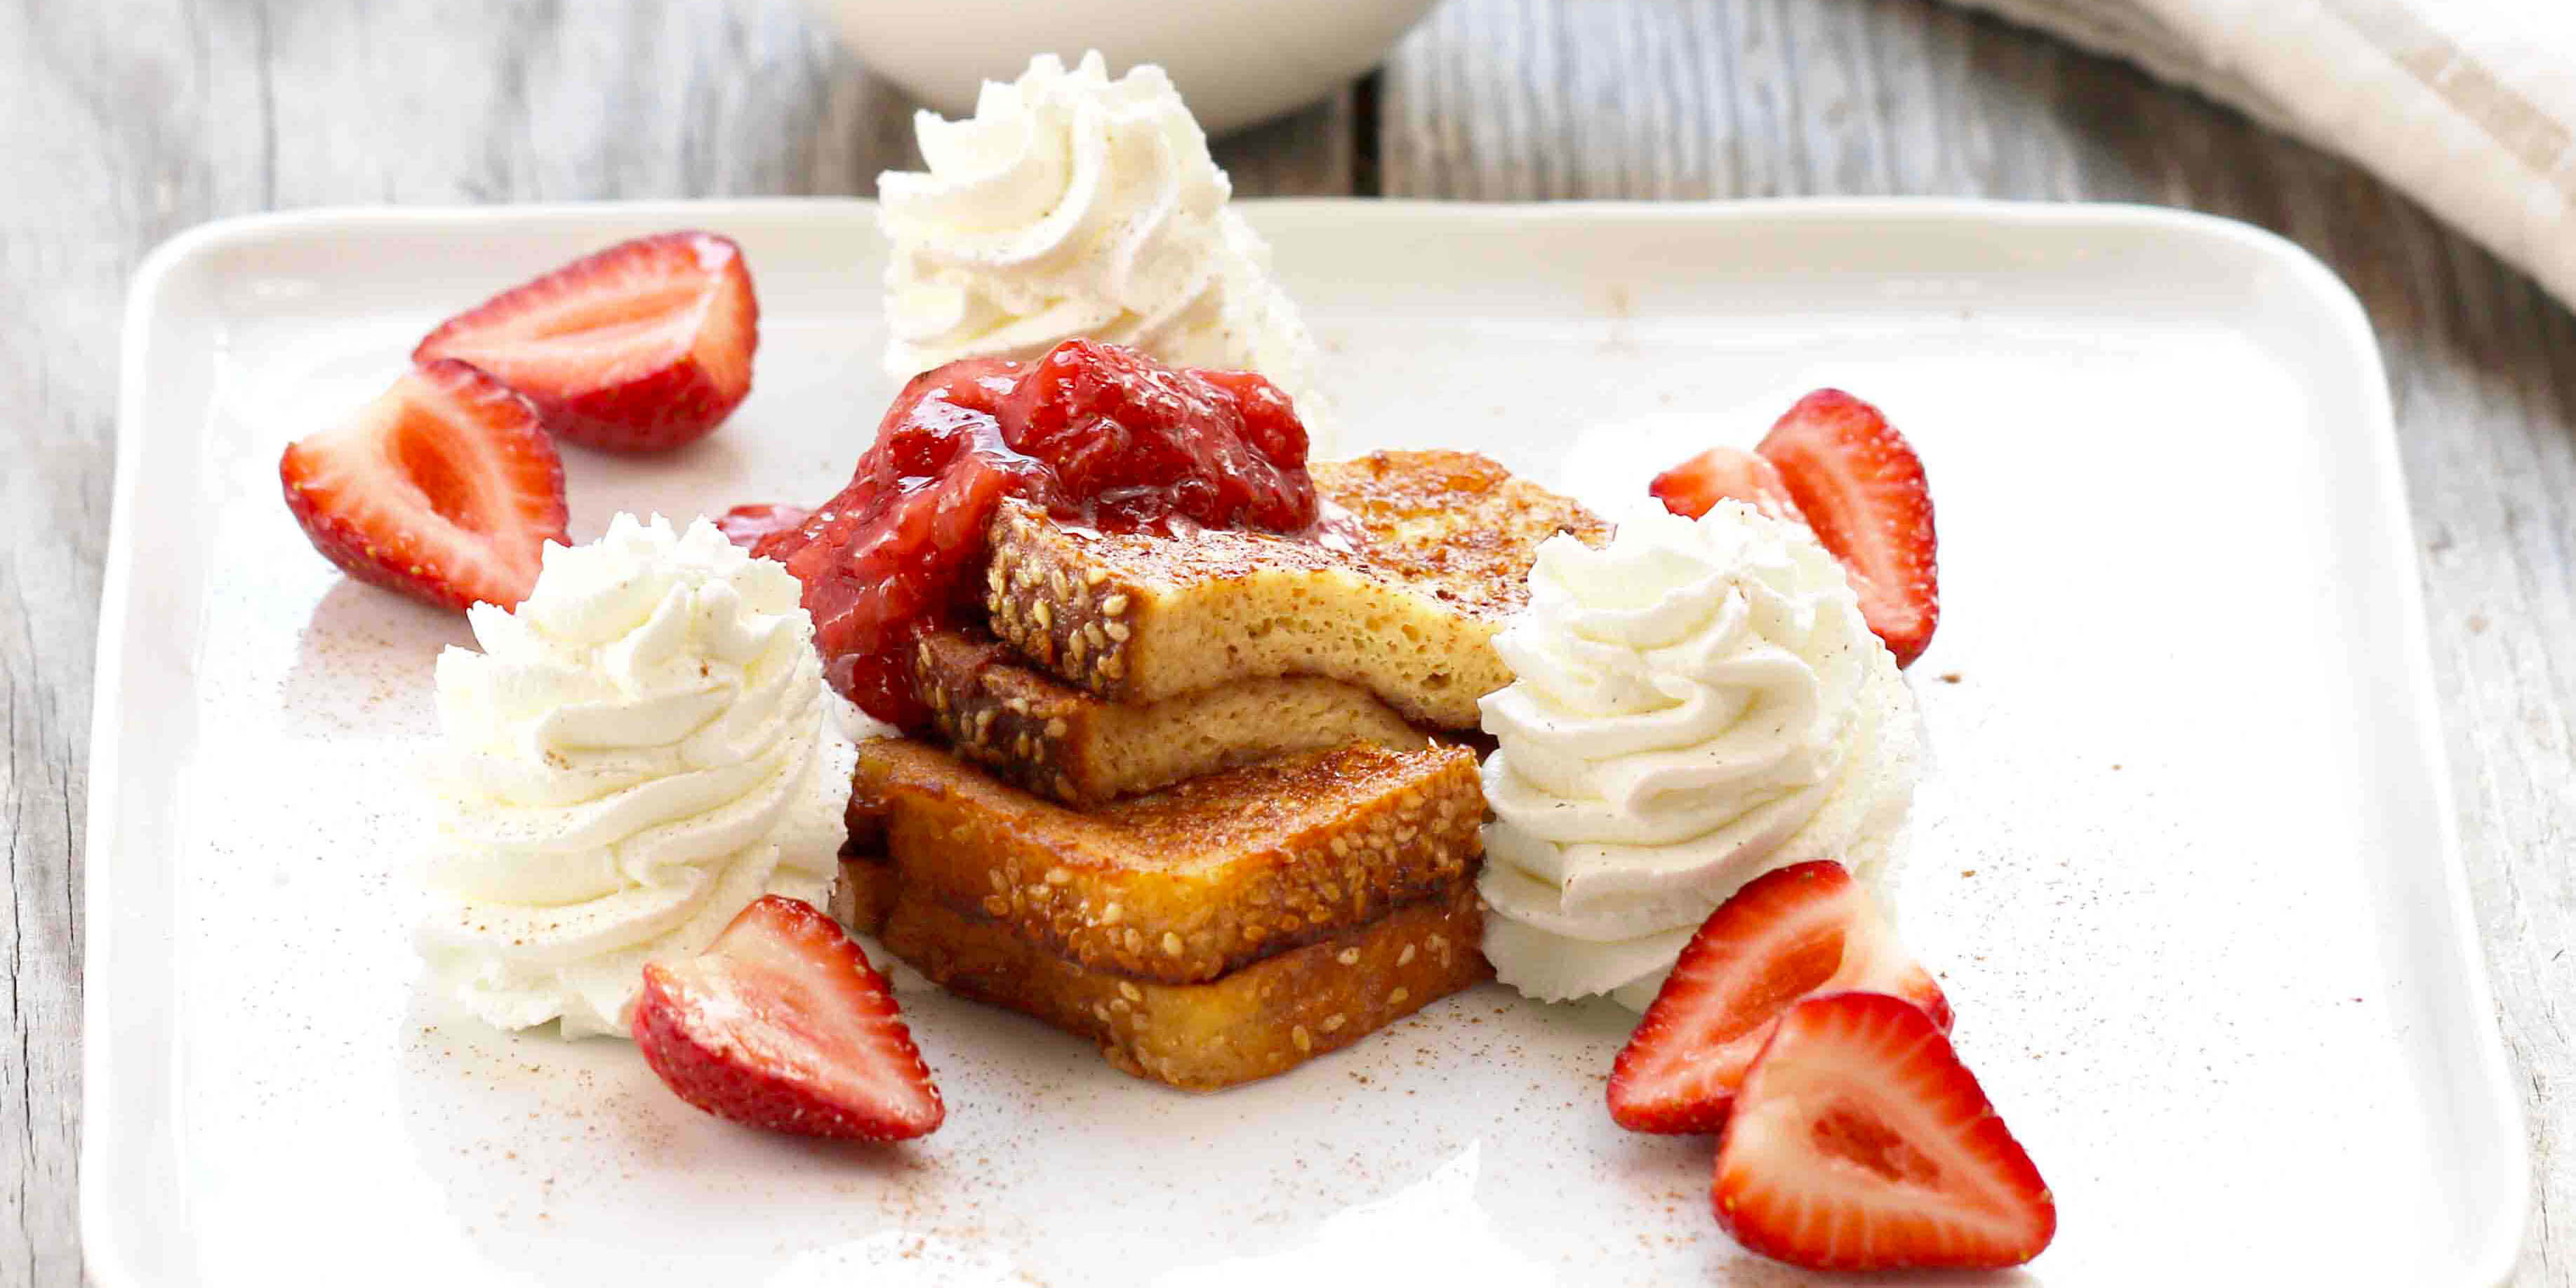 Cinnamon French Toast with Strawberry-Rhubarb Compote